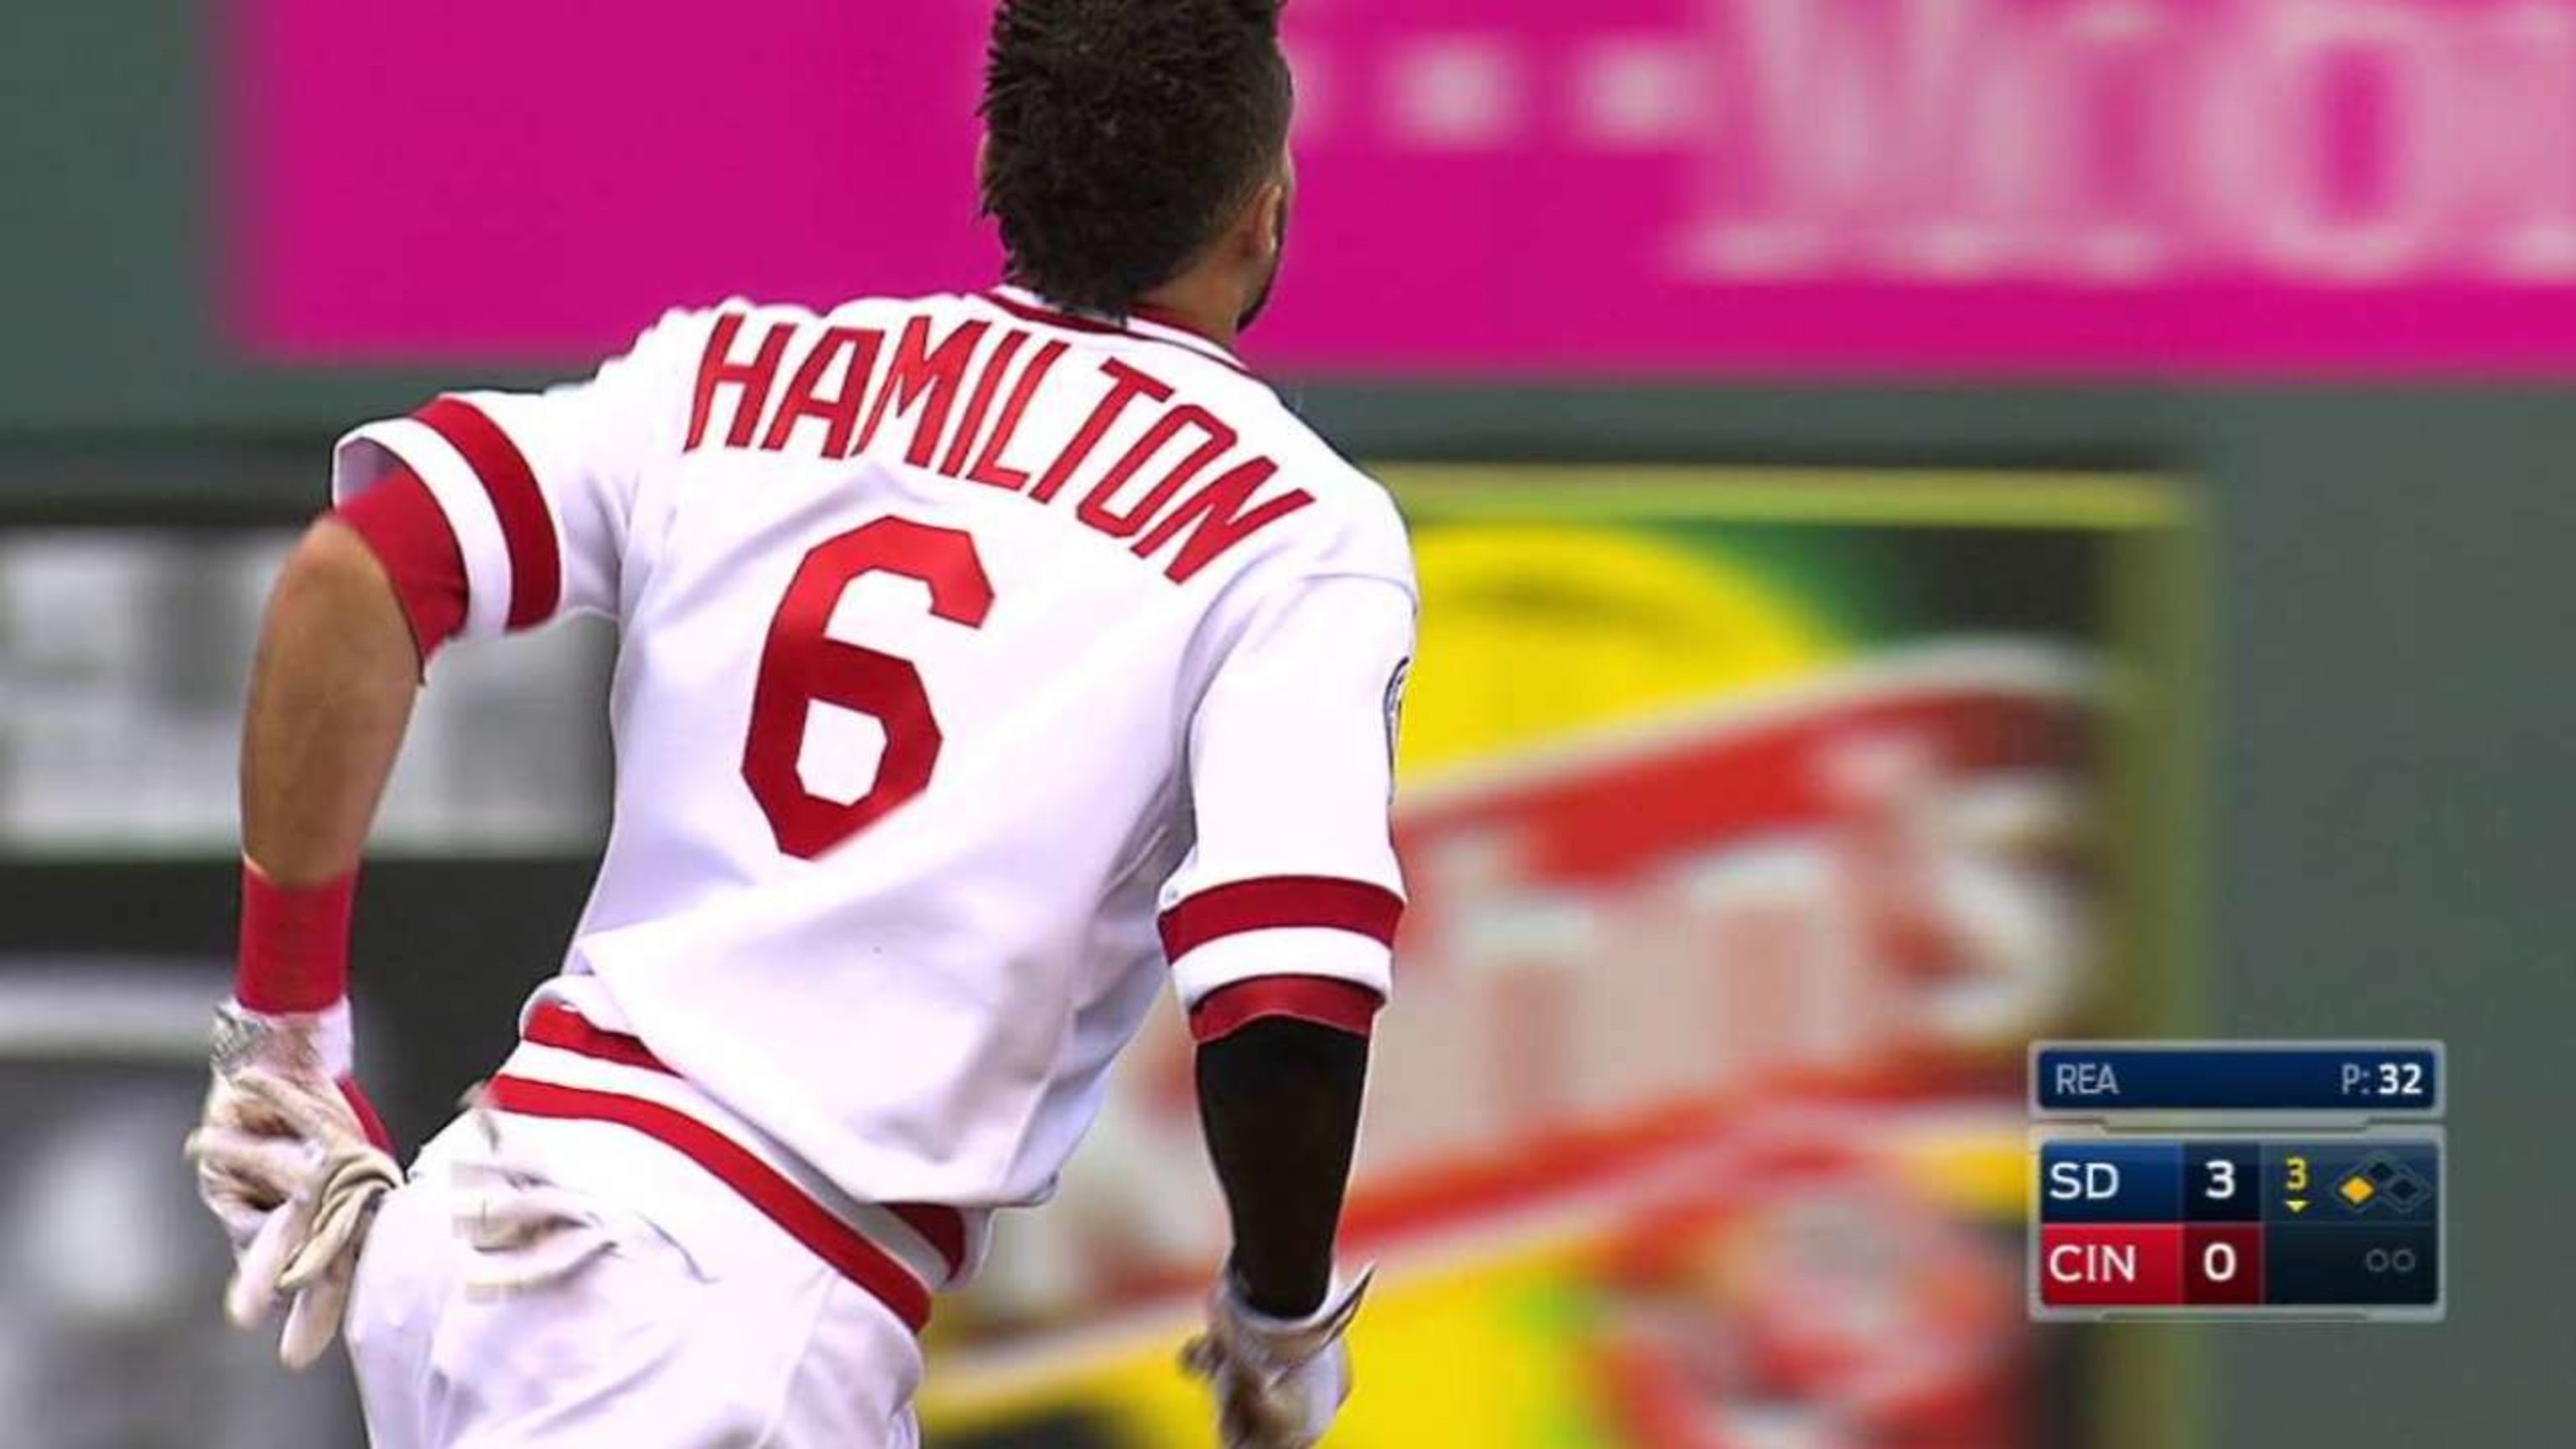 Source: Royals sign Hamilton, considered fastest player in MLB